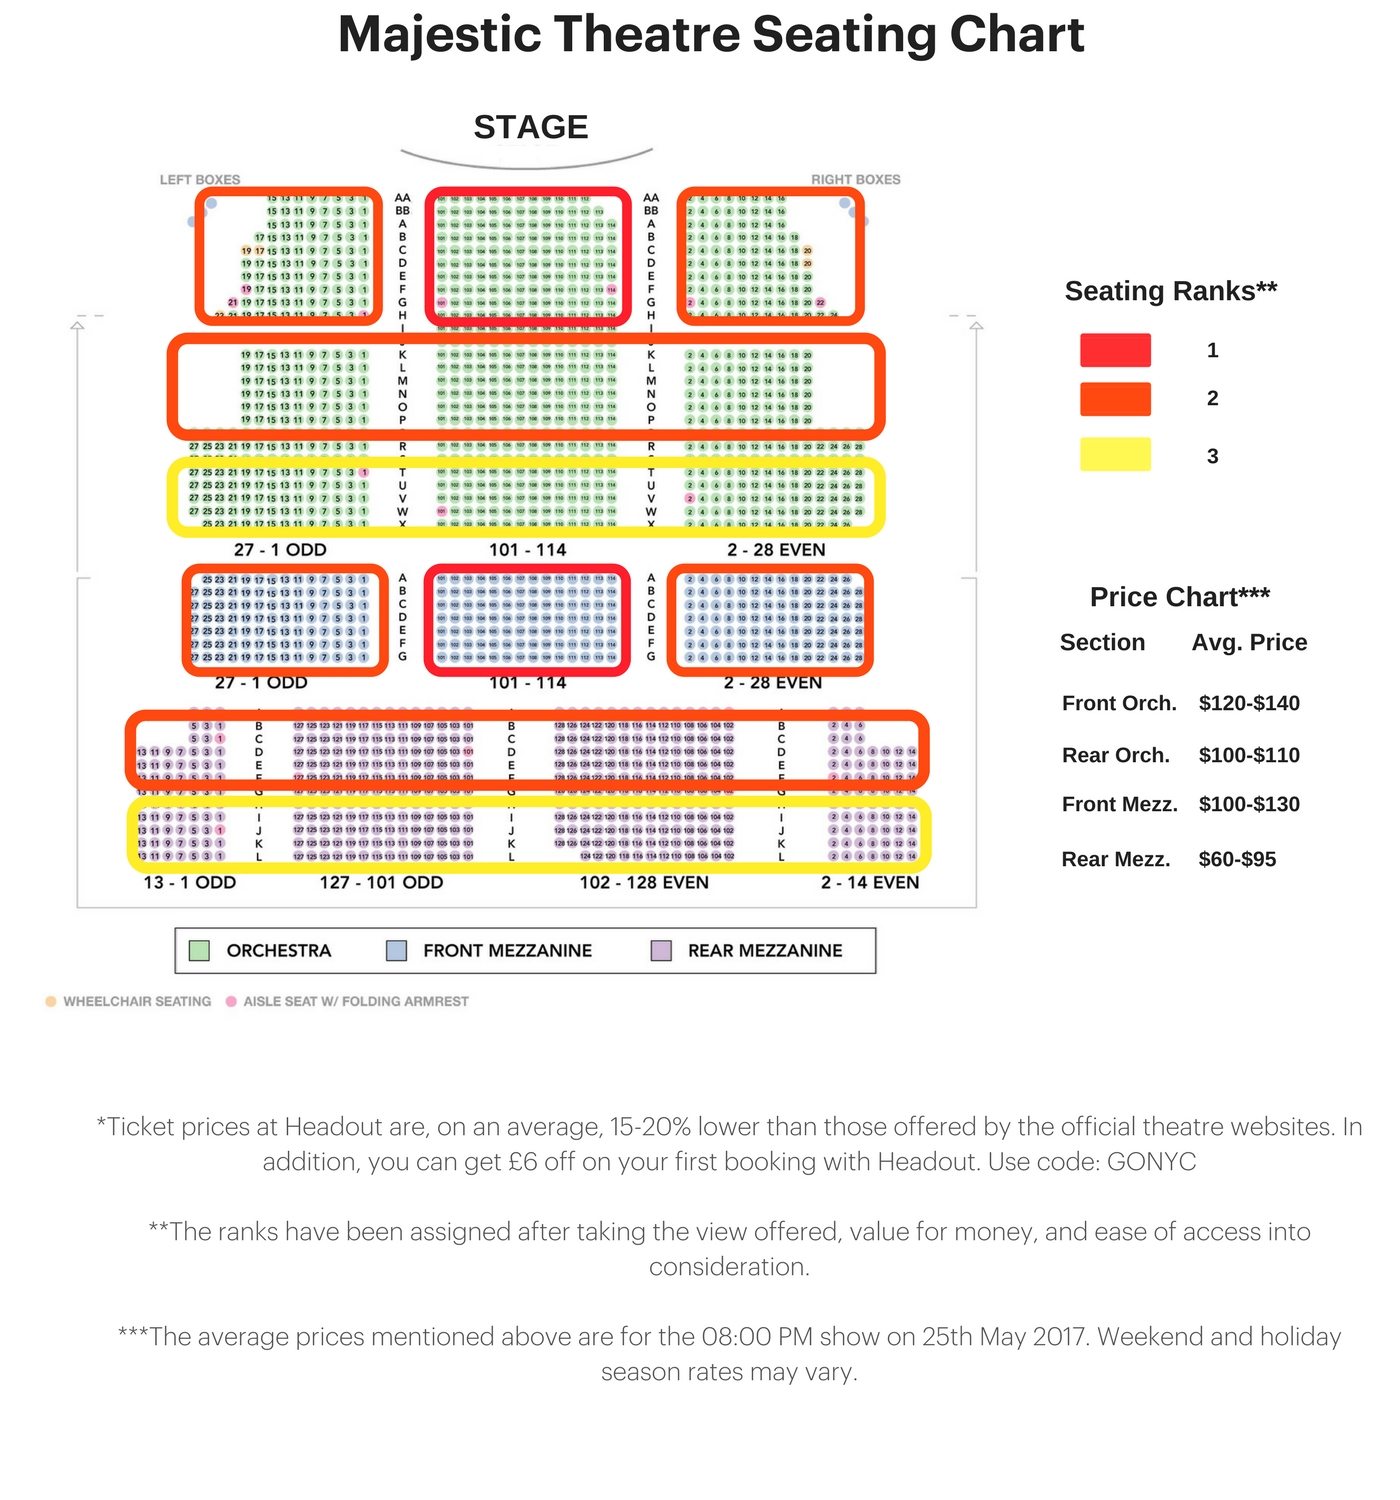 Majestic-theatre-seating-chart